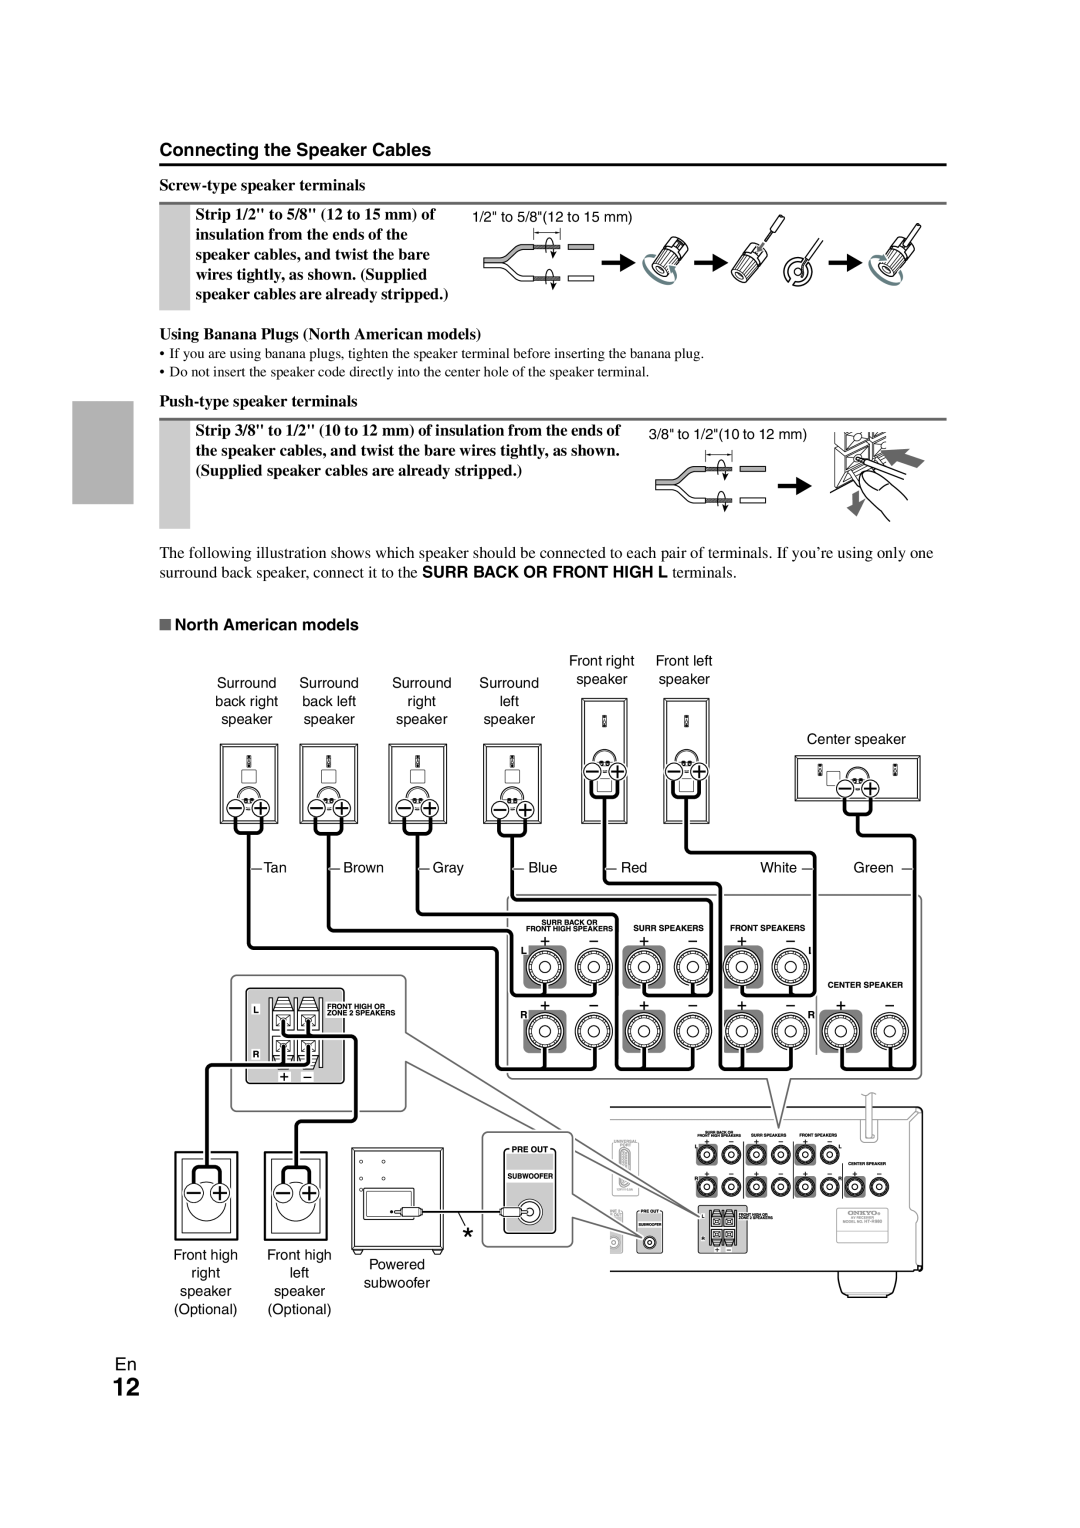 Onkyo HT-R980 instruction manual Connecting the Speaker Cables, North American models 